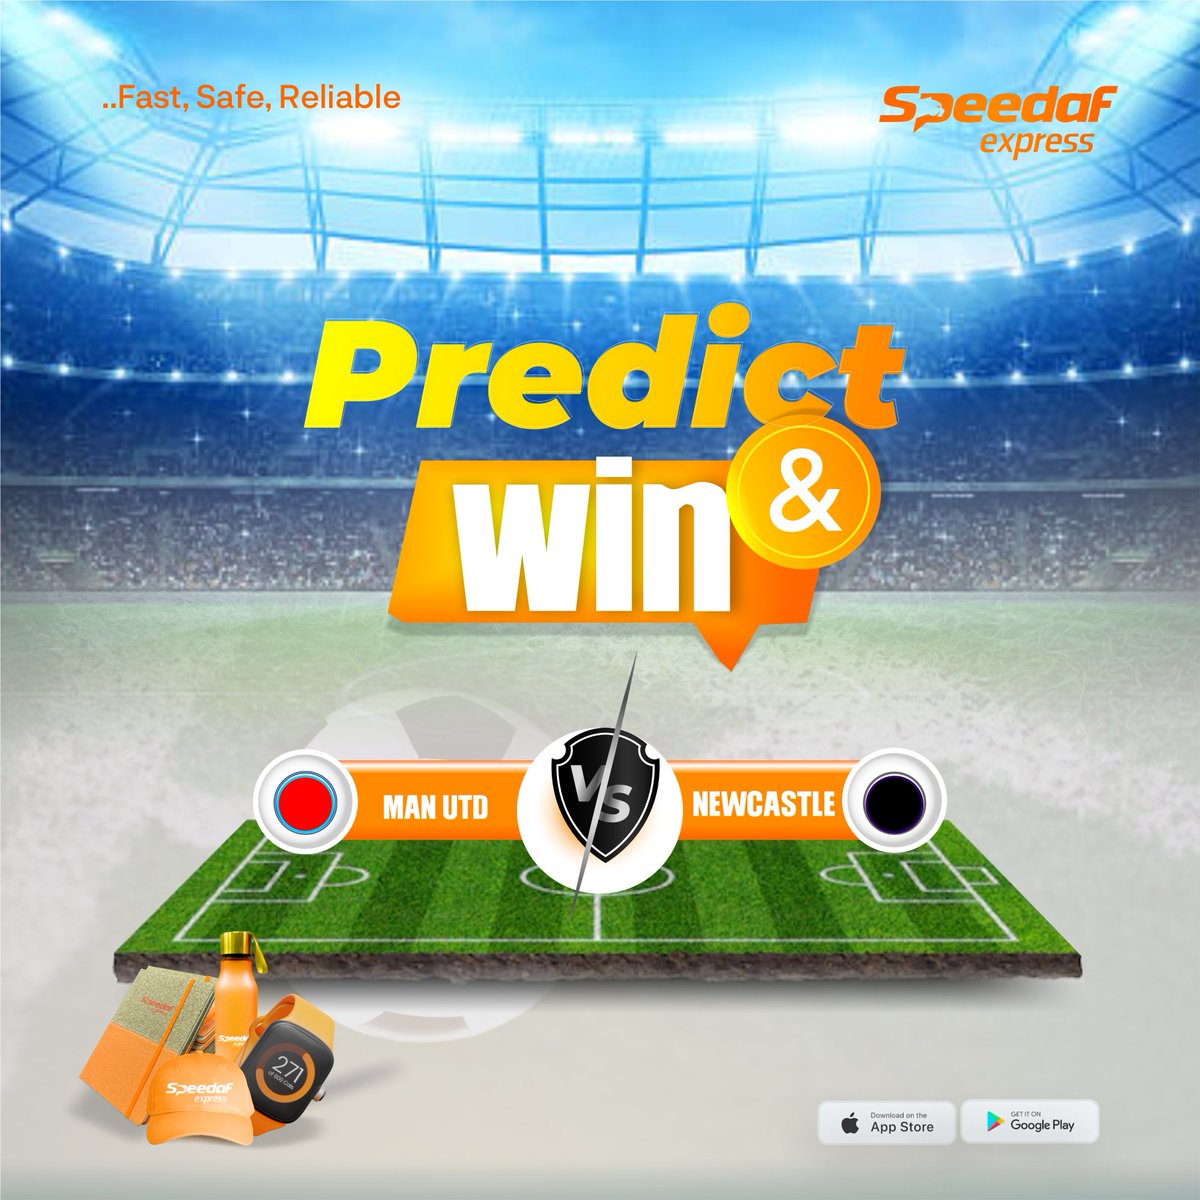 🏆Manchester United vs Newcastle Predict and Win Challenge! Get ready for an exciting match between Manchester United and Newcastle! ⚽ Predict the final score of the match in the comments below and stand a chance to win exclusive Speedaf Express merchandise! 🎖️🥈🎉 How to